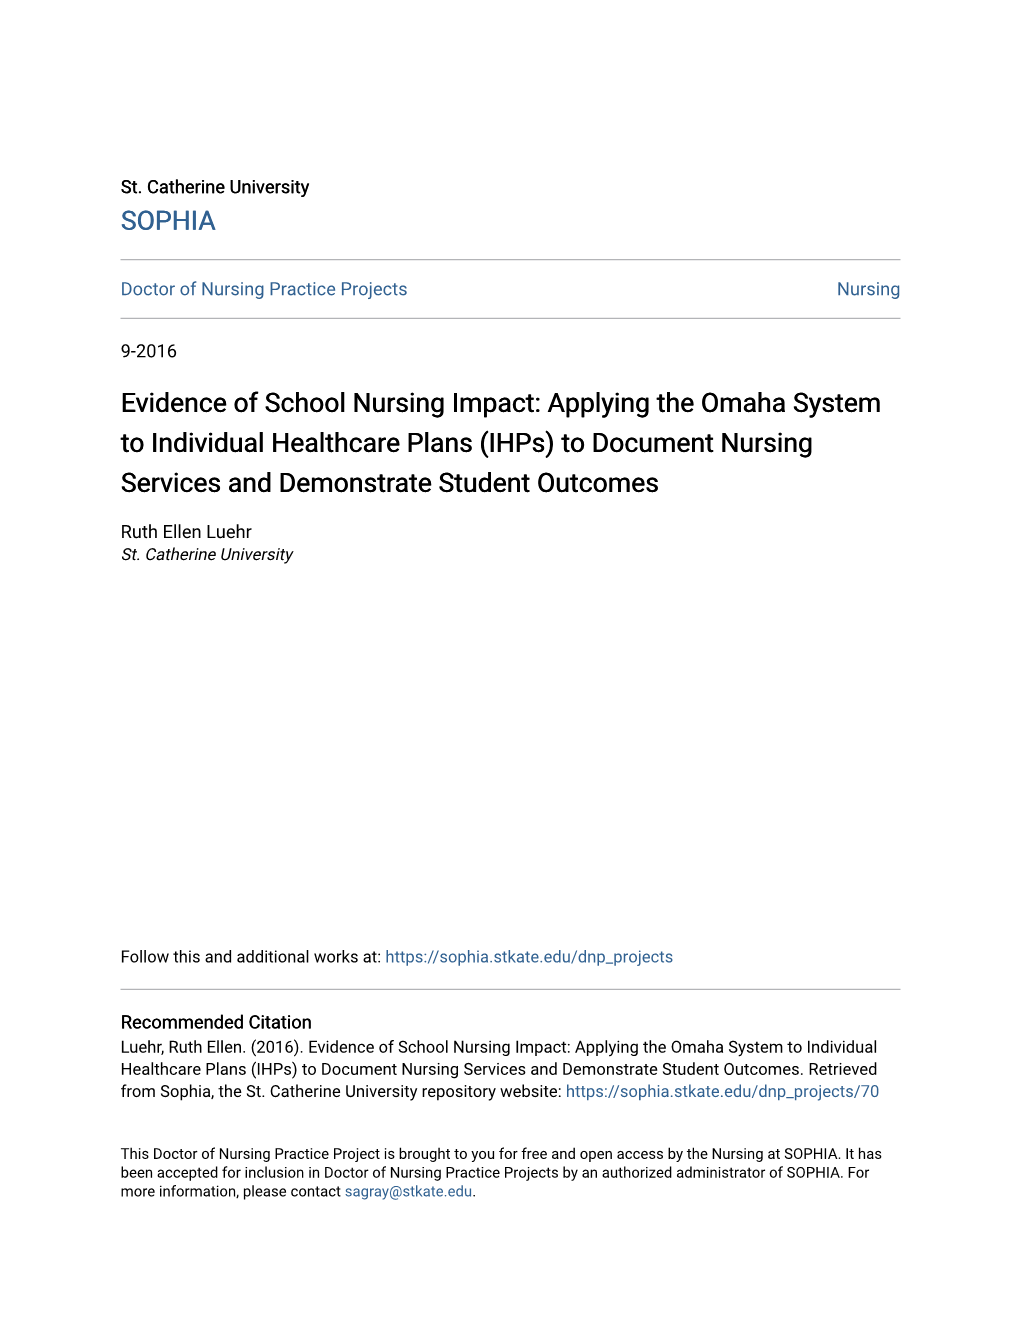 Applying the Omaha System to Individual Healthcare Plans (Ihps) to Document Nursing Services and Demonstrate Student Outcomes